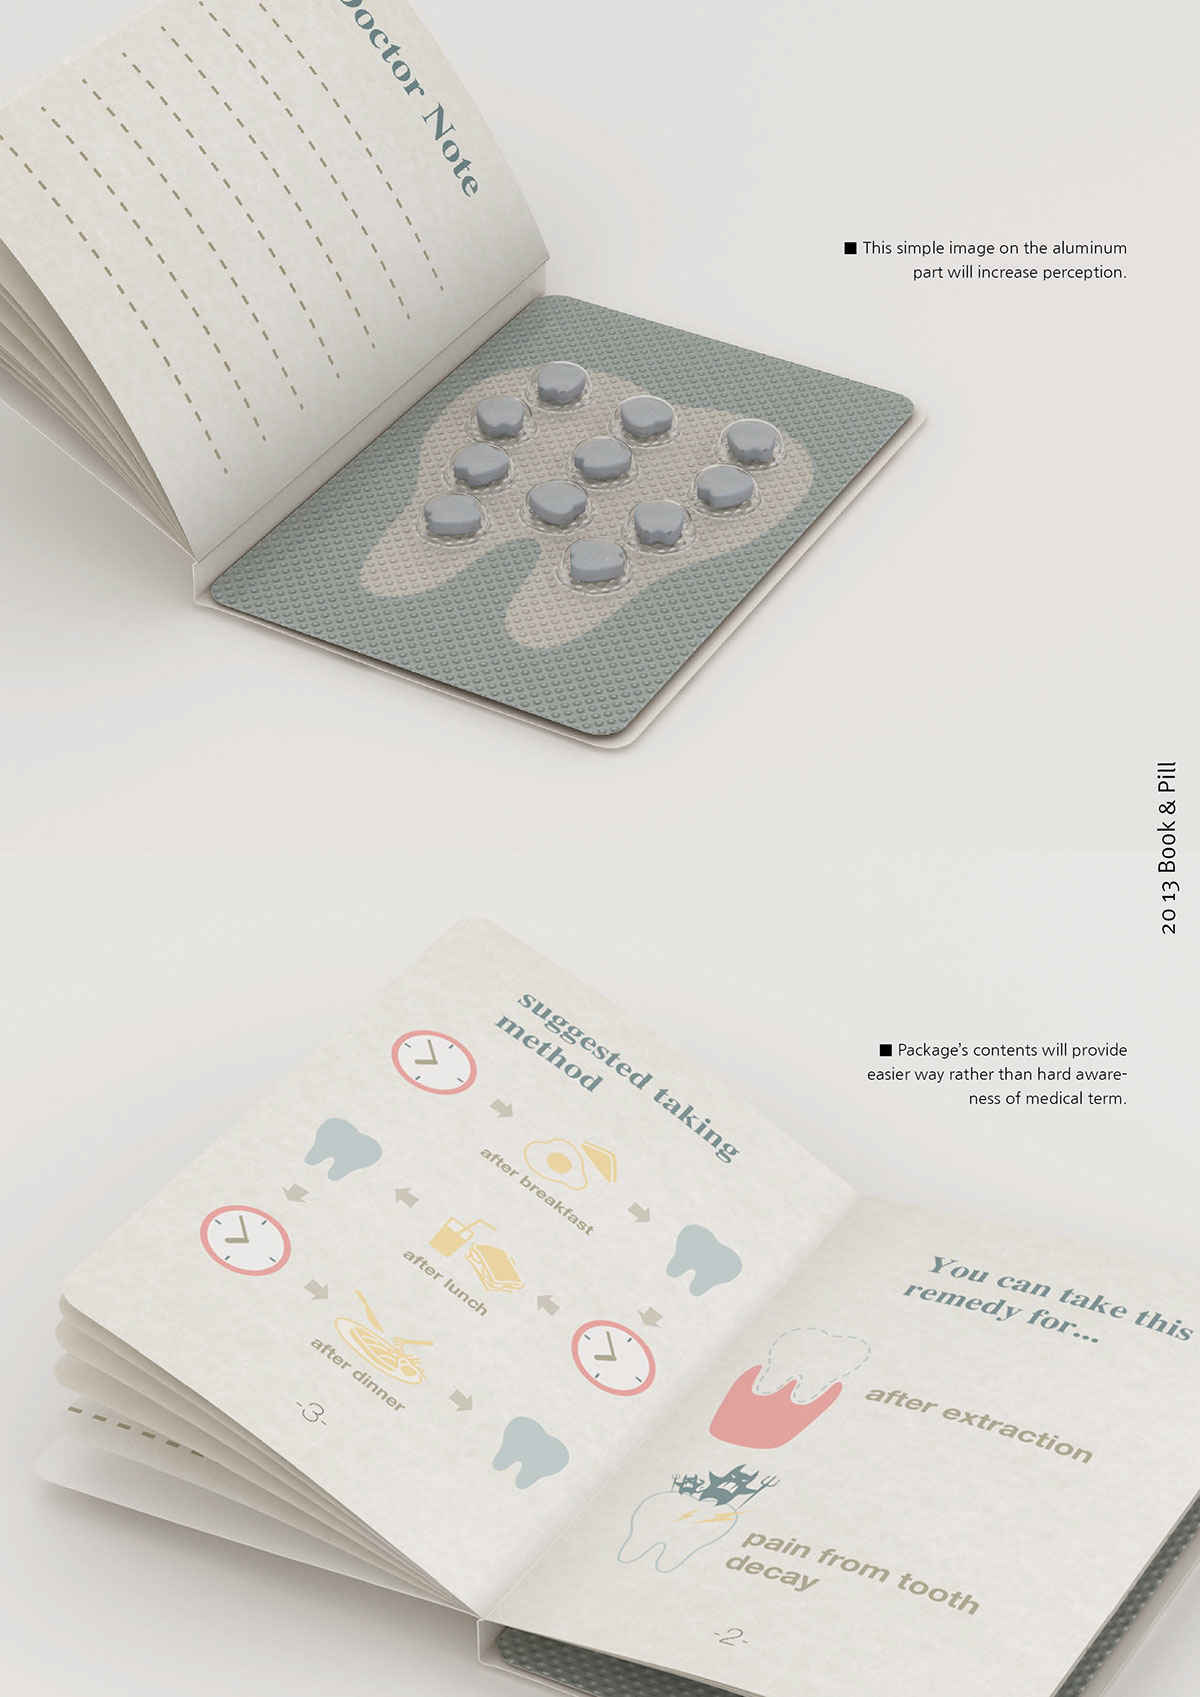 packagingdesign product pill case Blister design package pentawards graphic awarded